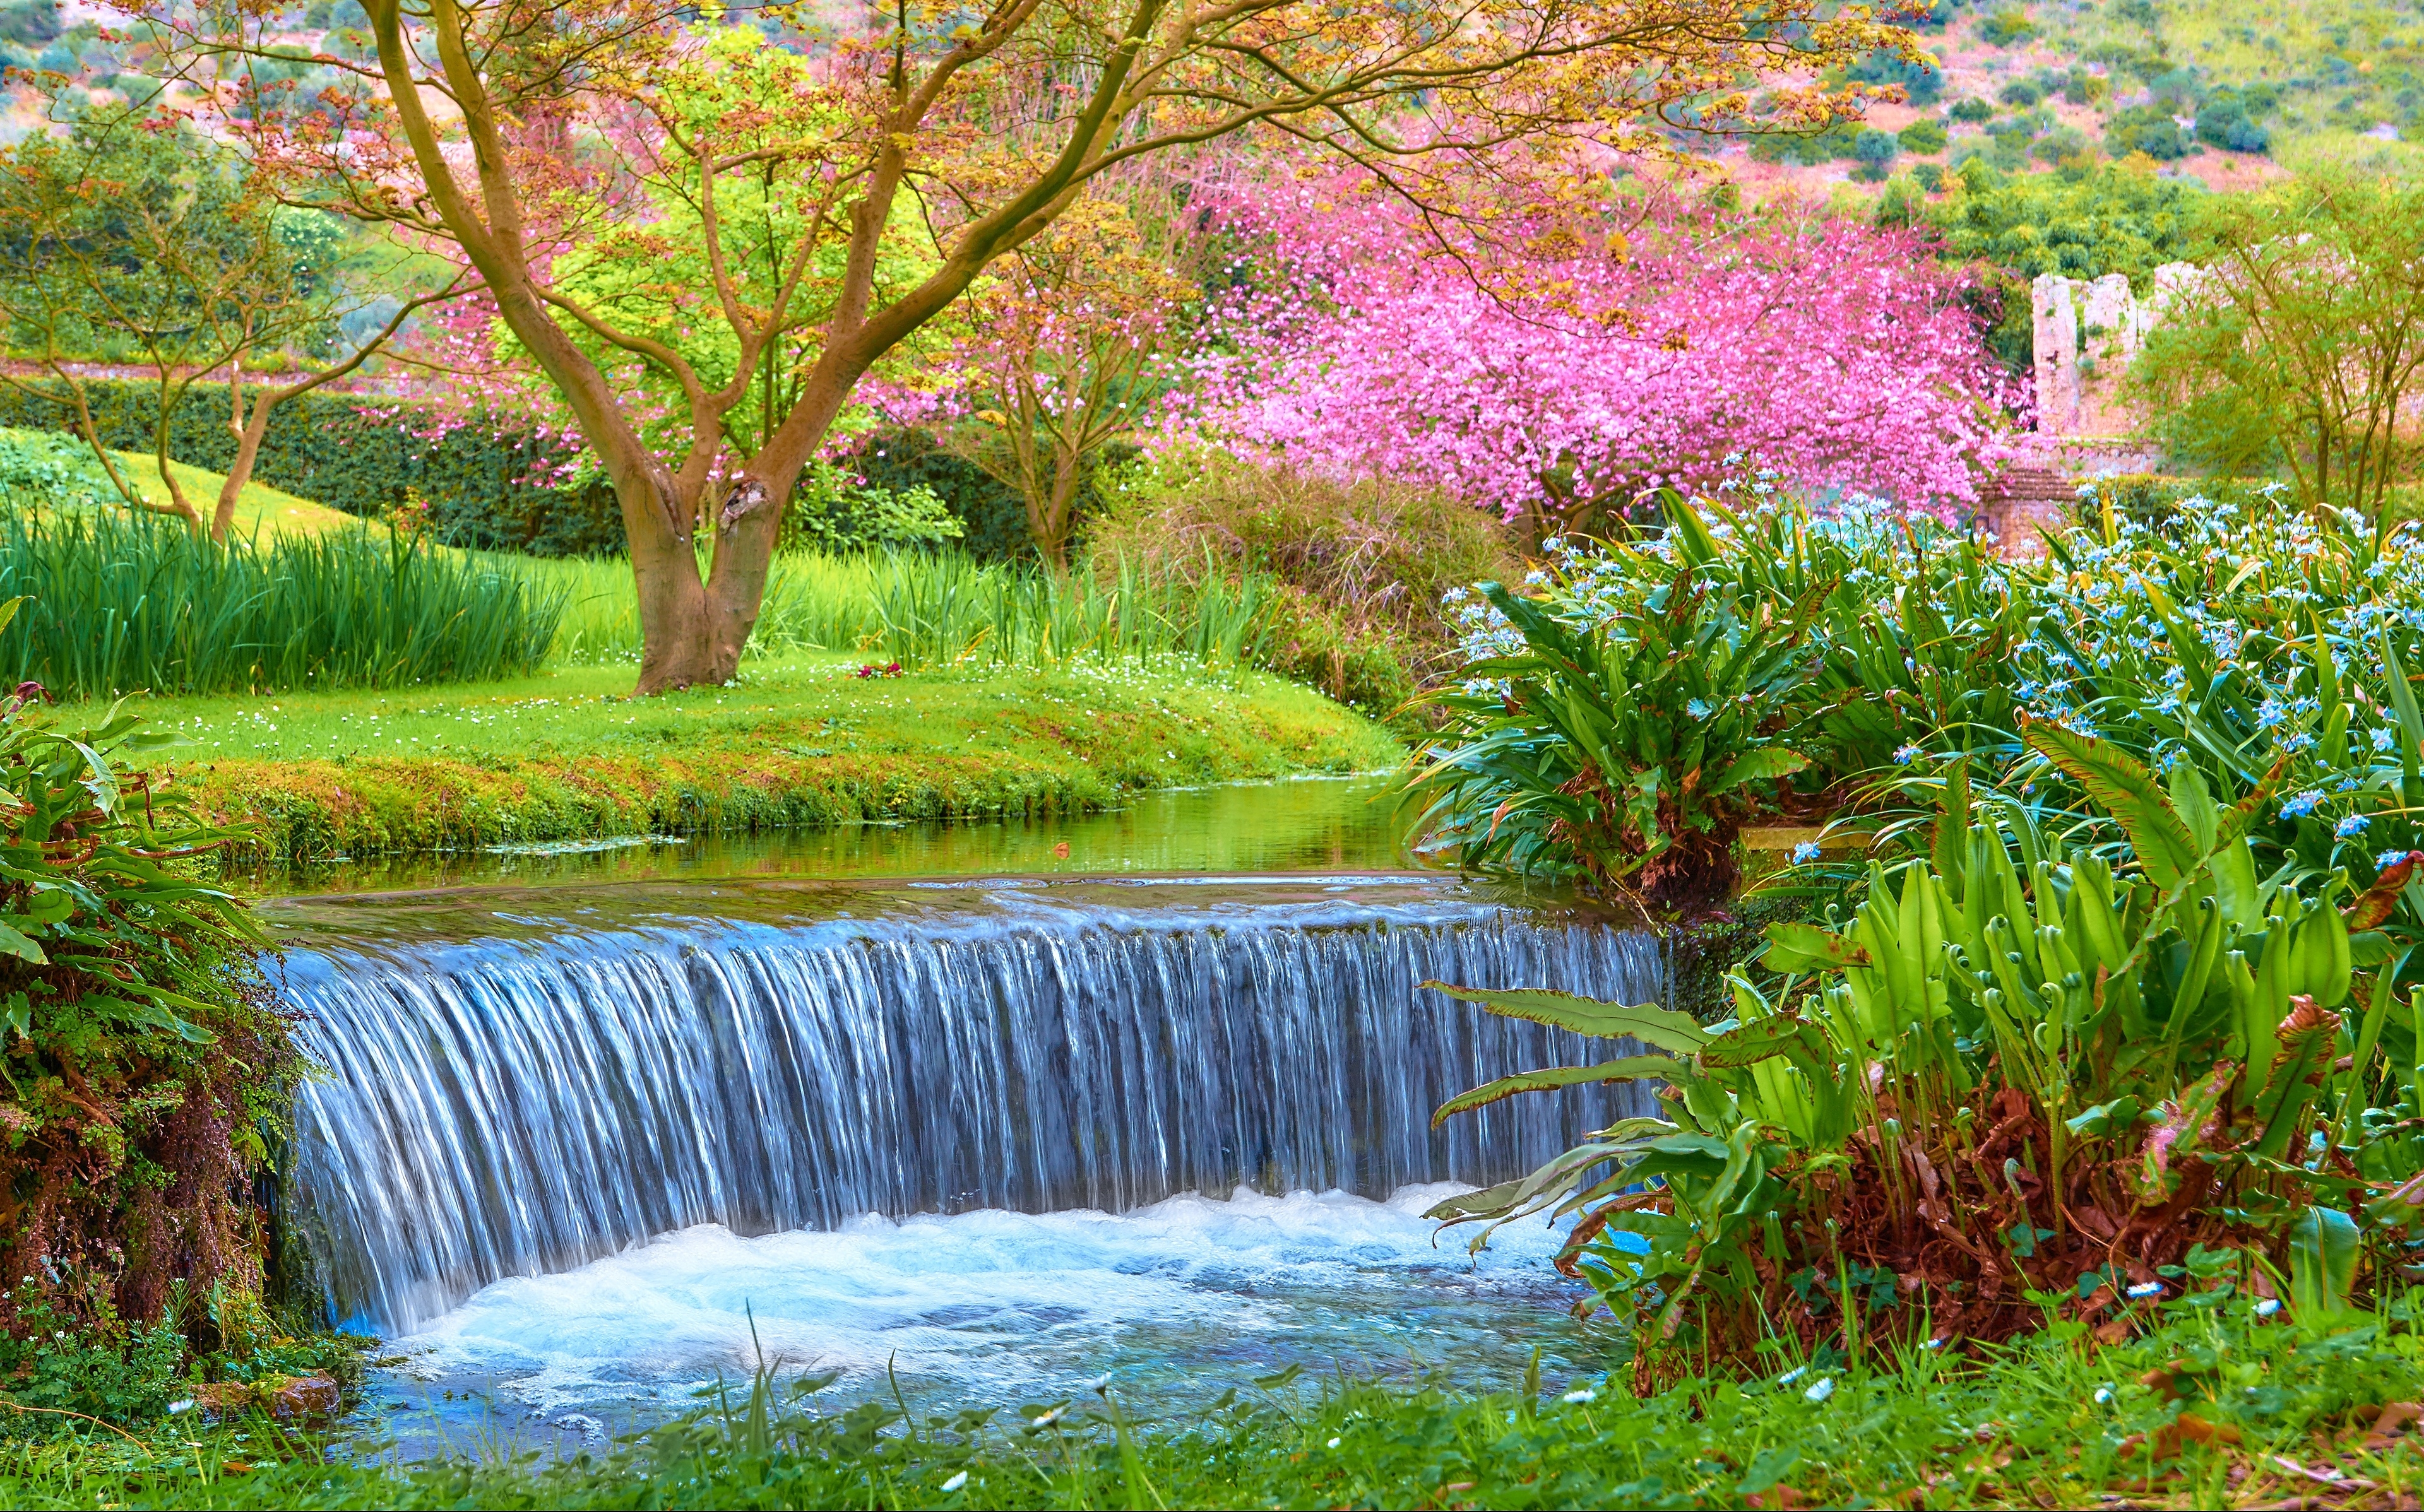 Wallpapers The Ninfa Garden central Italy is a landscape garden in the Cisterna di Latina on the desktop